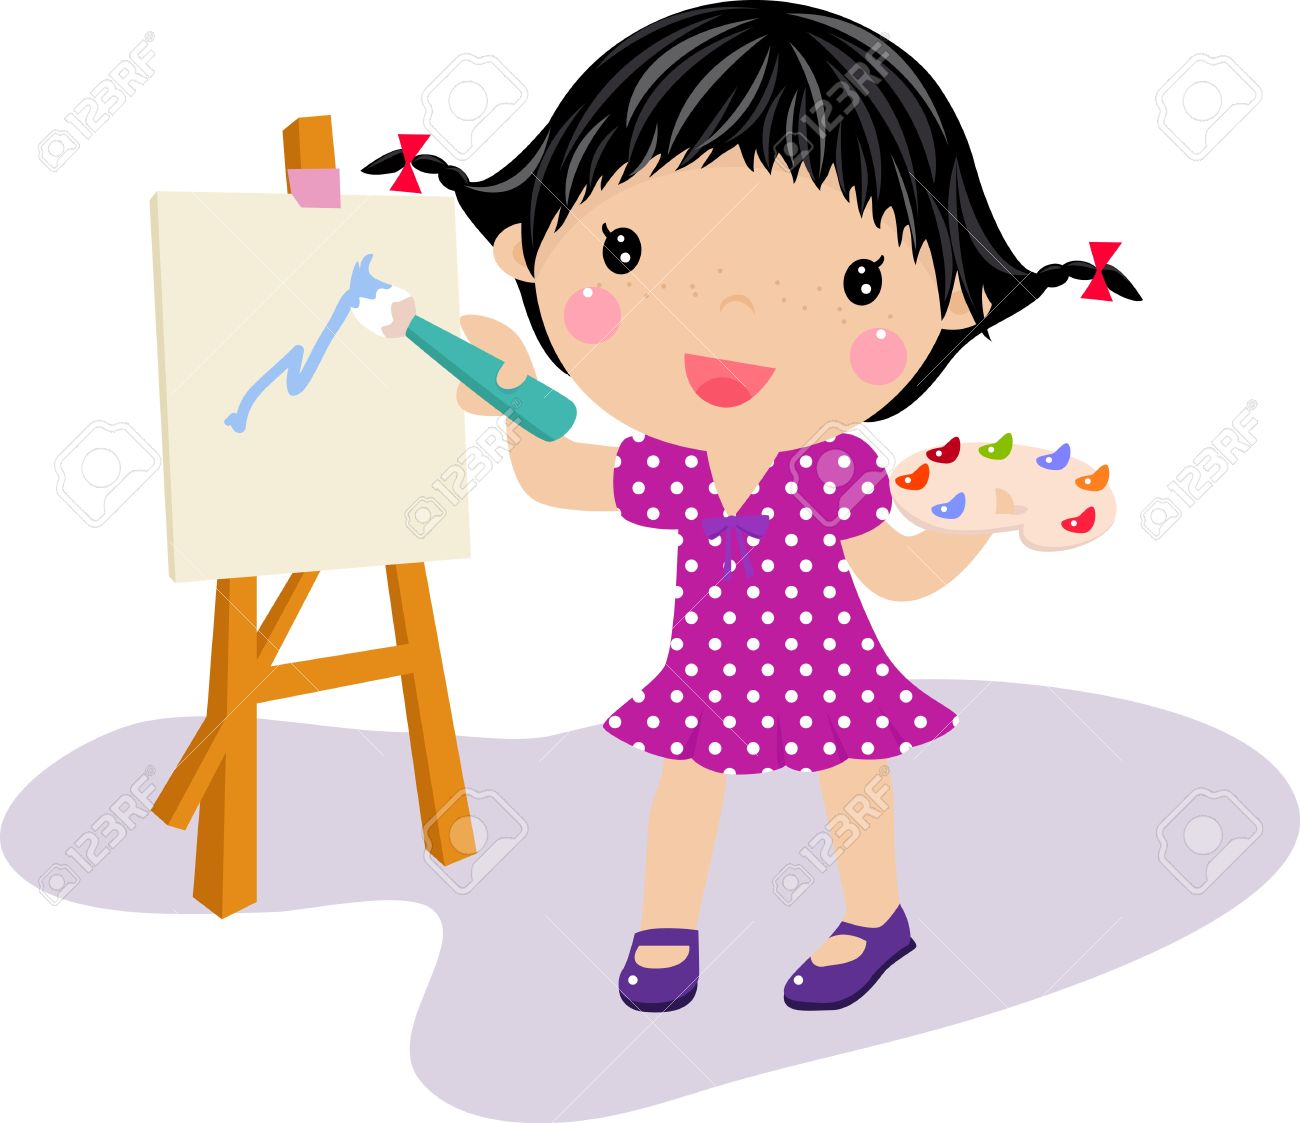 Child drawing clipart.